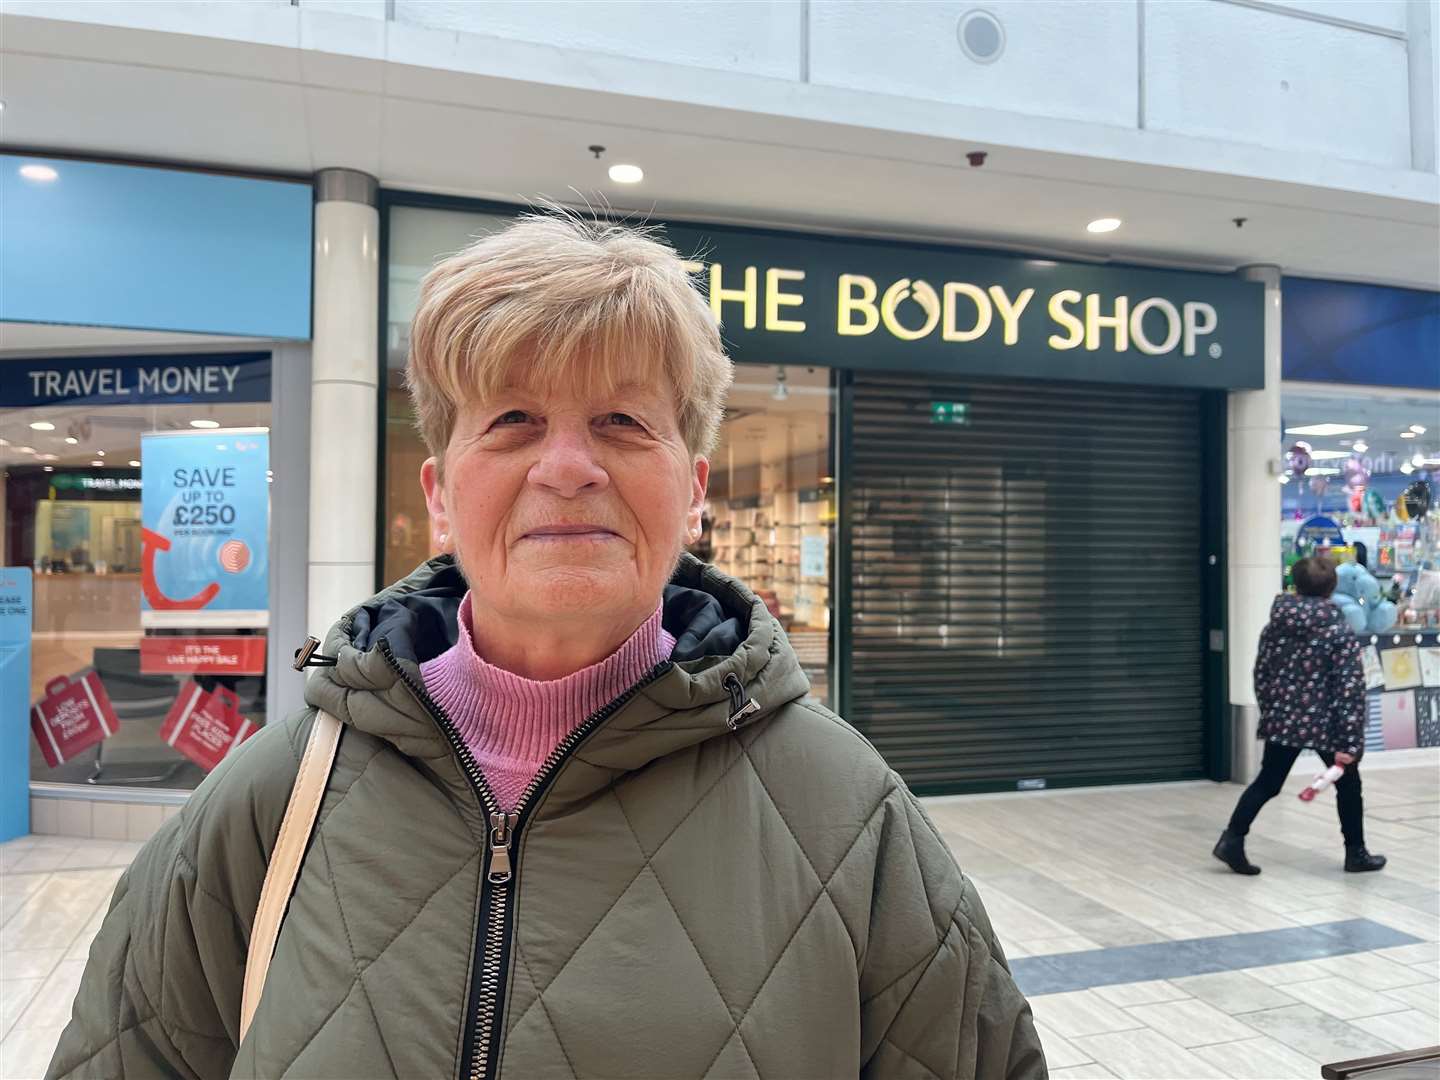 June Picton, 75, said she was not surprised to find out The Body Shop was closing